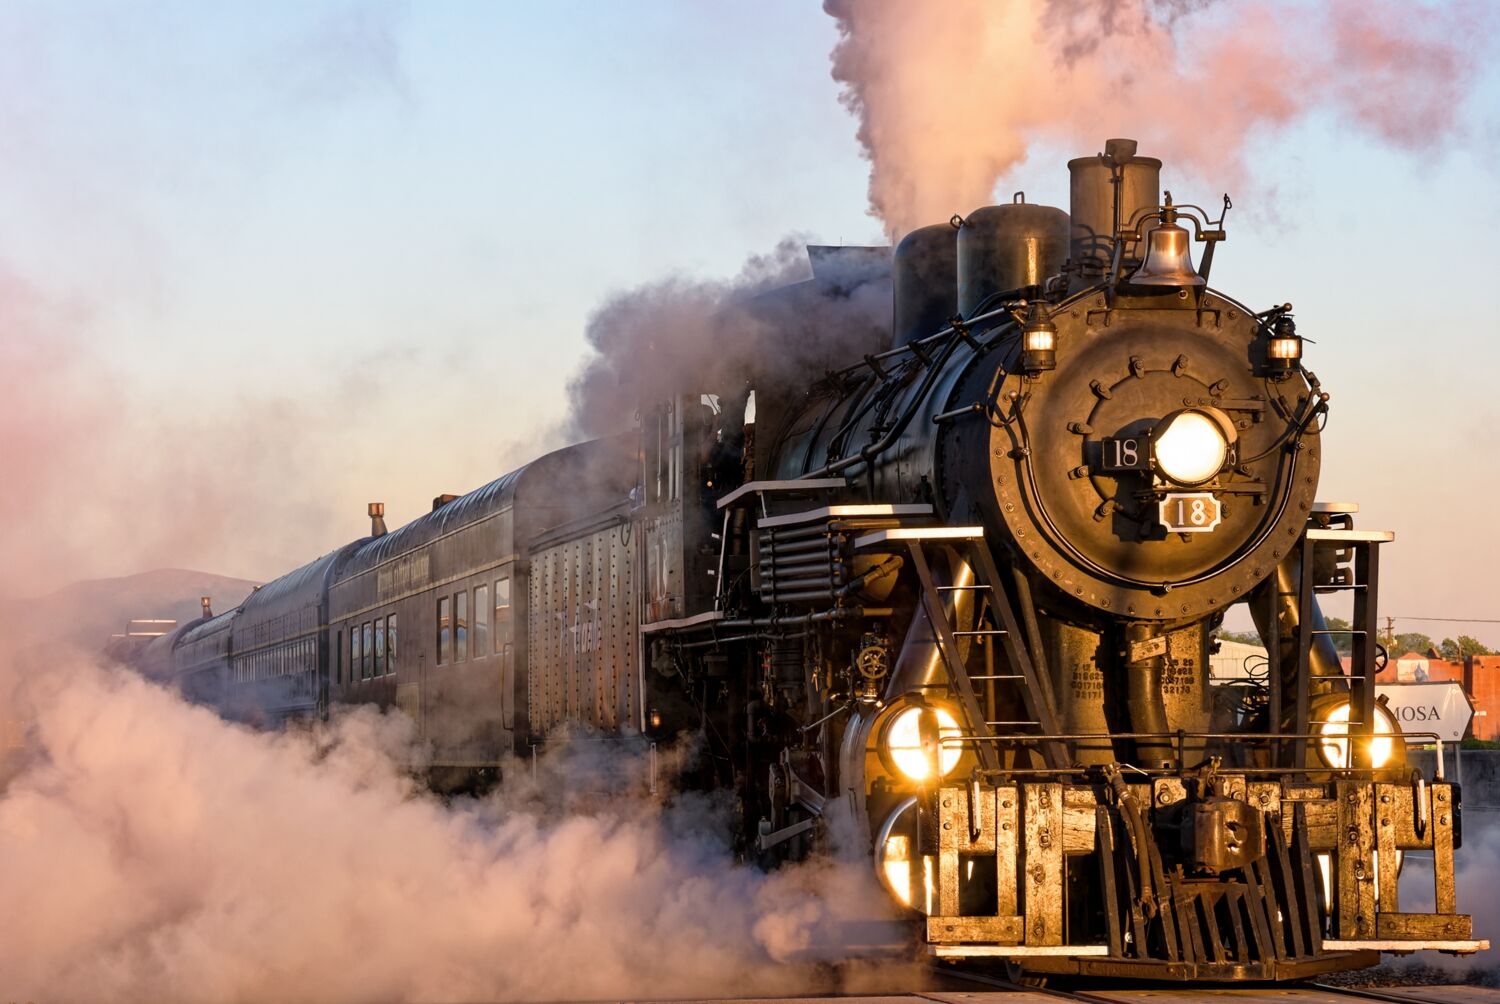 Ex Grand Canyon Railway number 18 lettered for the Rio Grande Railroad puts on a spectacular show of force at sunrise in Alamosa...